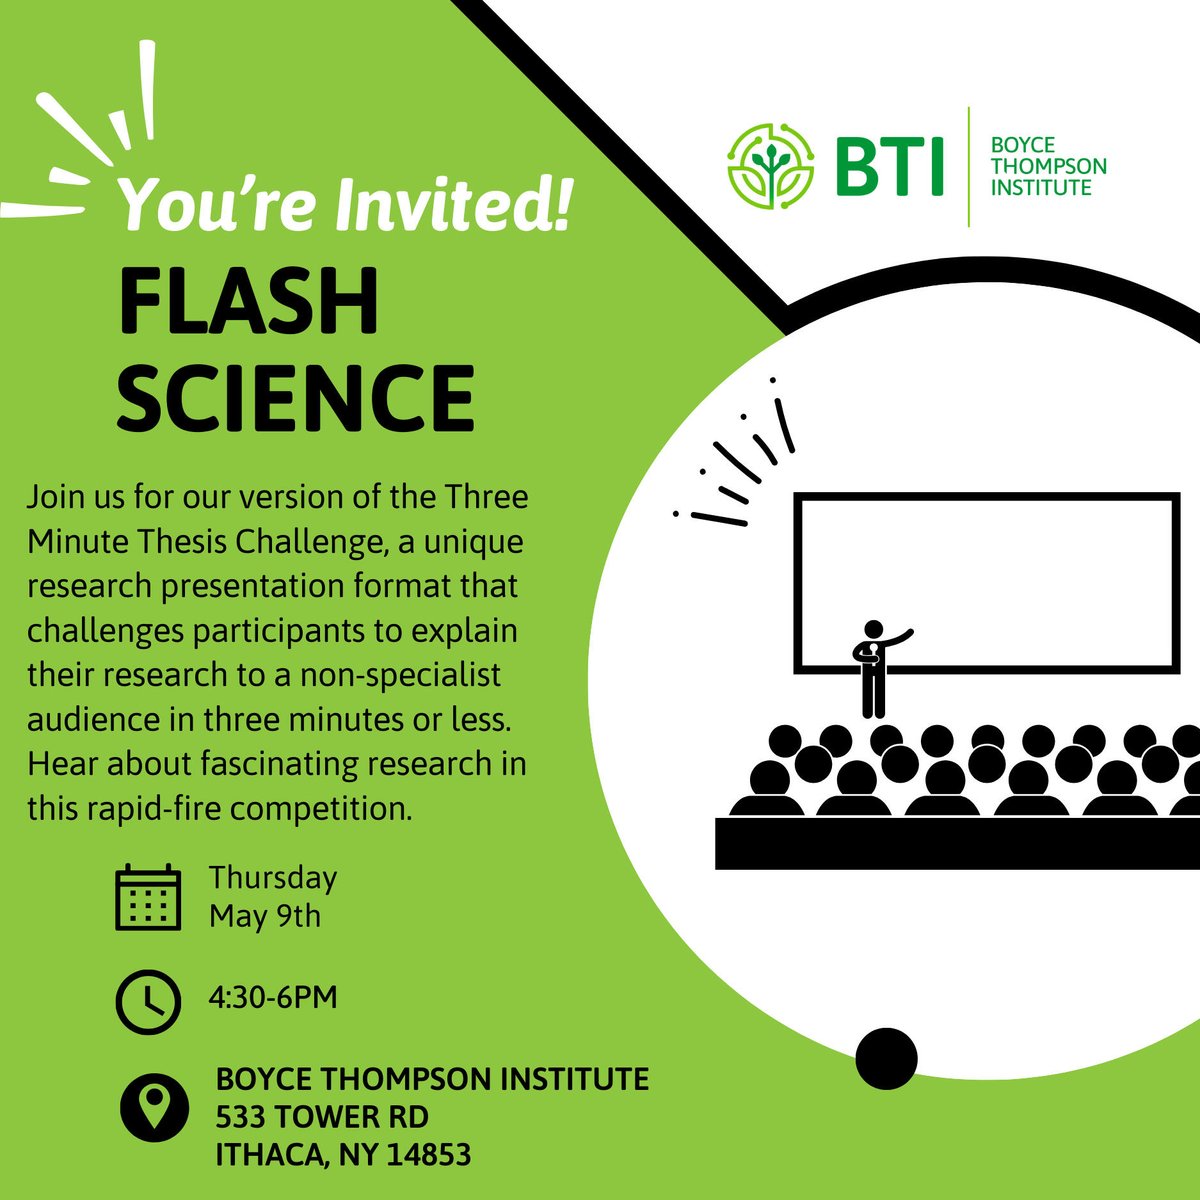 Join us for Flash Science on 5/9!💡🌱This exciting format challenges participants to explain their research to a non-specialist audience in three minutes or less. Think Shark Tank, but for science!🧪🔬 Online and in-person! Learn more and register here: 100.btiscience.org/#flashscience